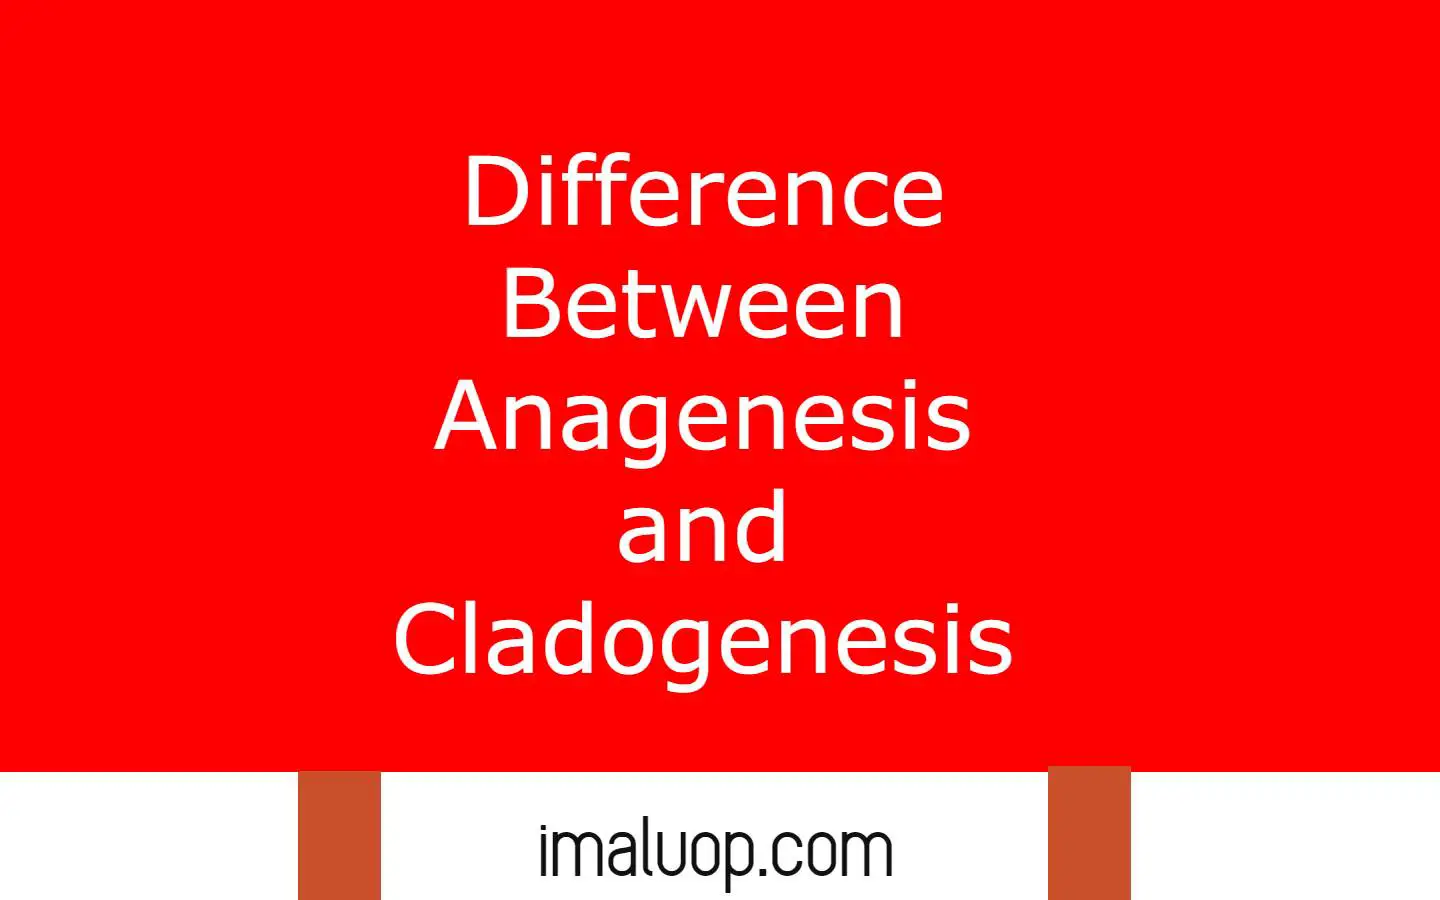 Difference Between Anagenesis and Cladogenesis